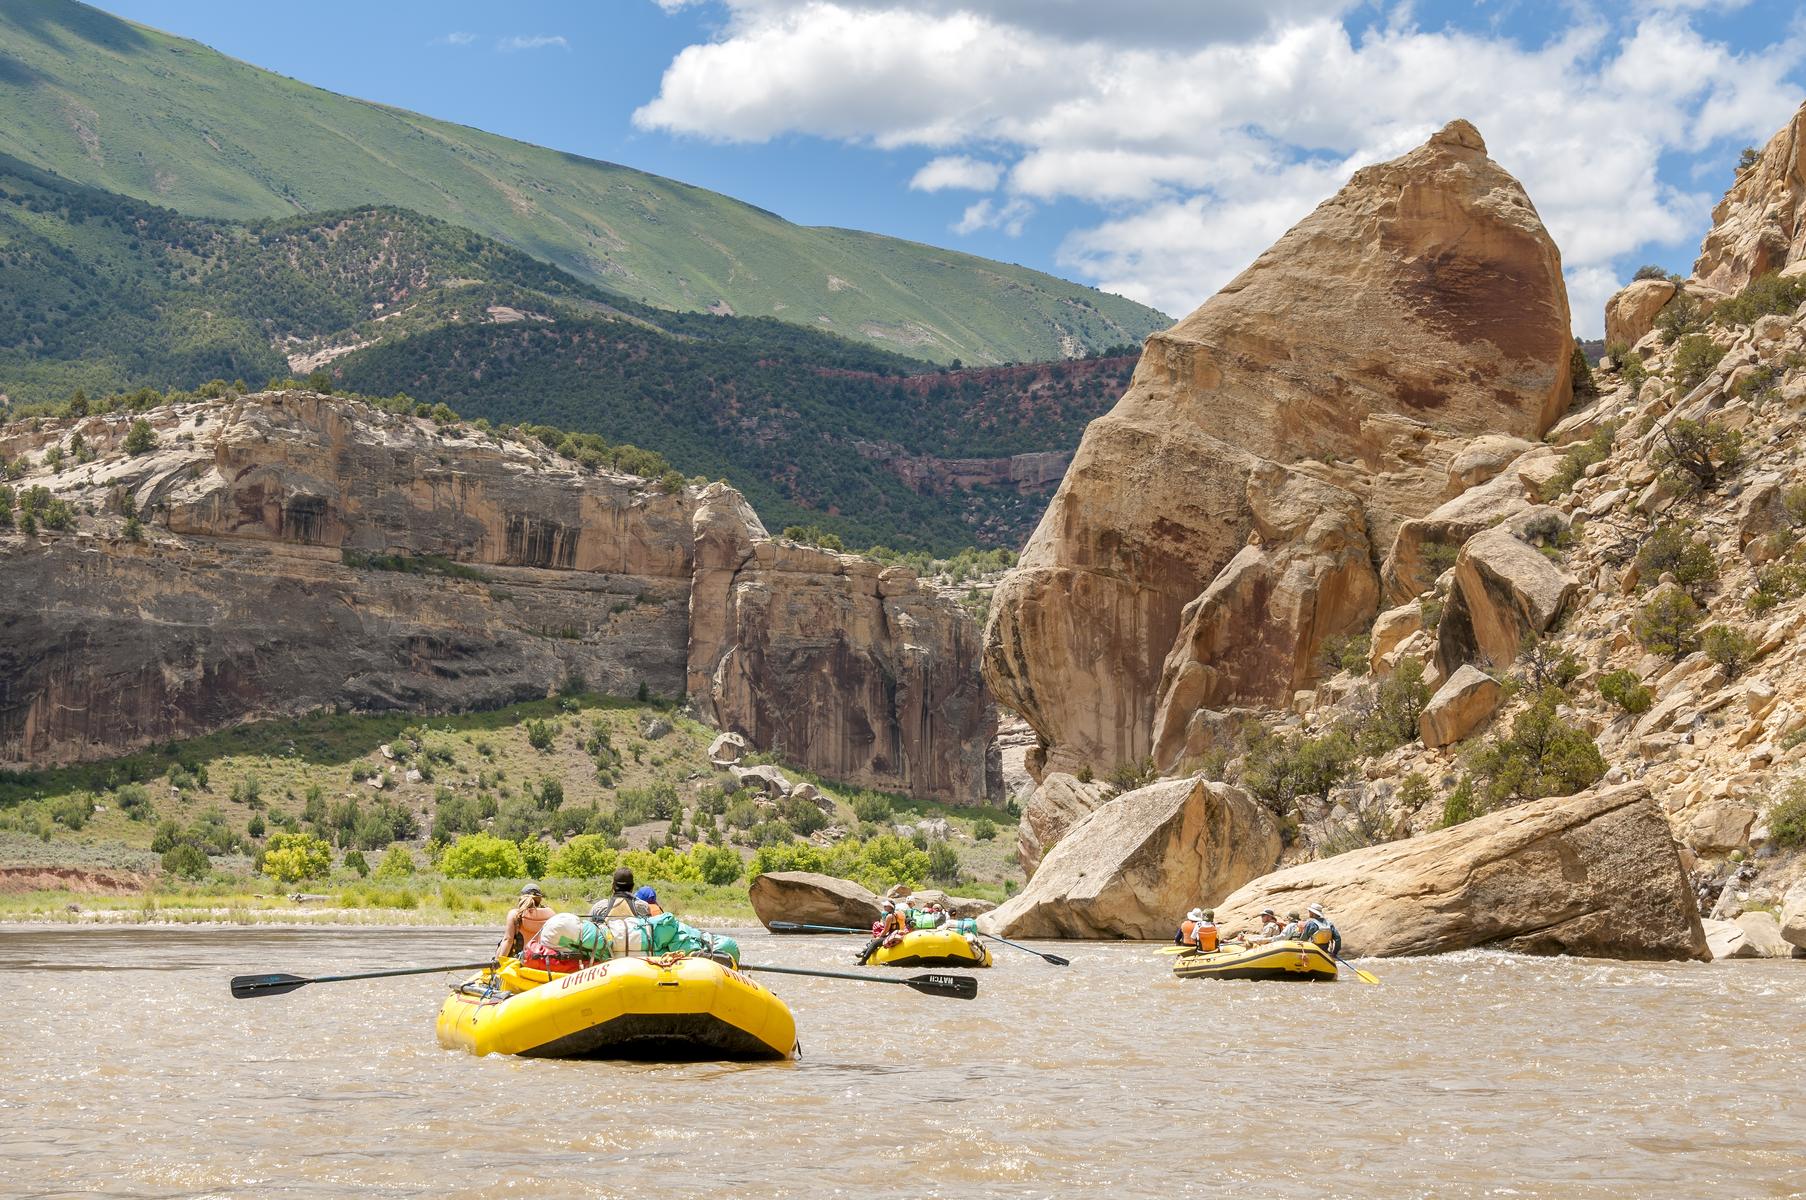 Rafts on the Yampa River